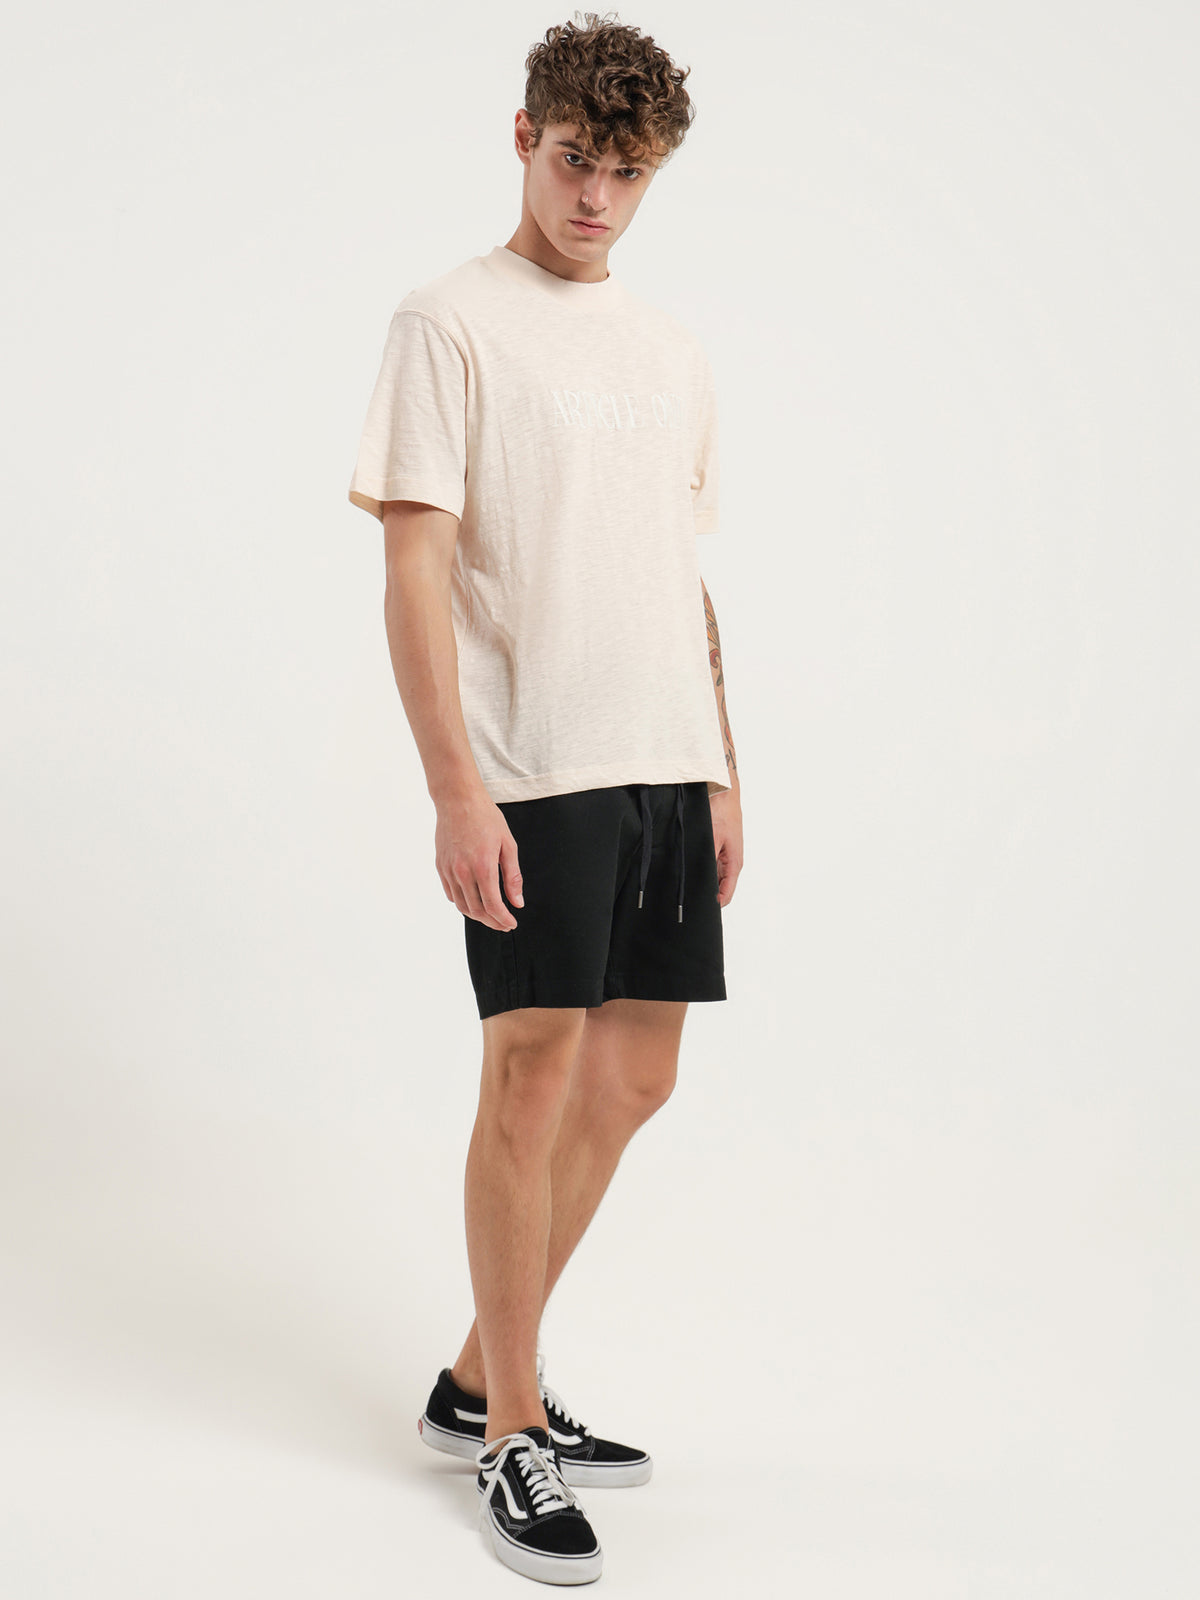 Article One Vintage Logo T-Shirt in Chalk | Chalk